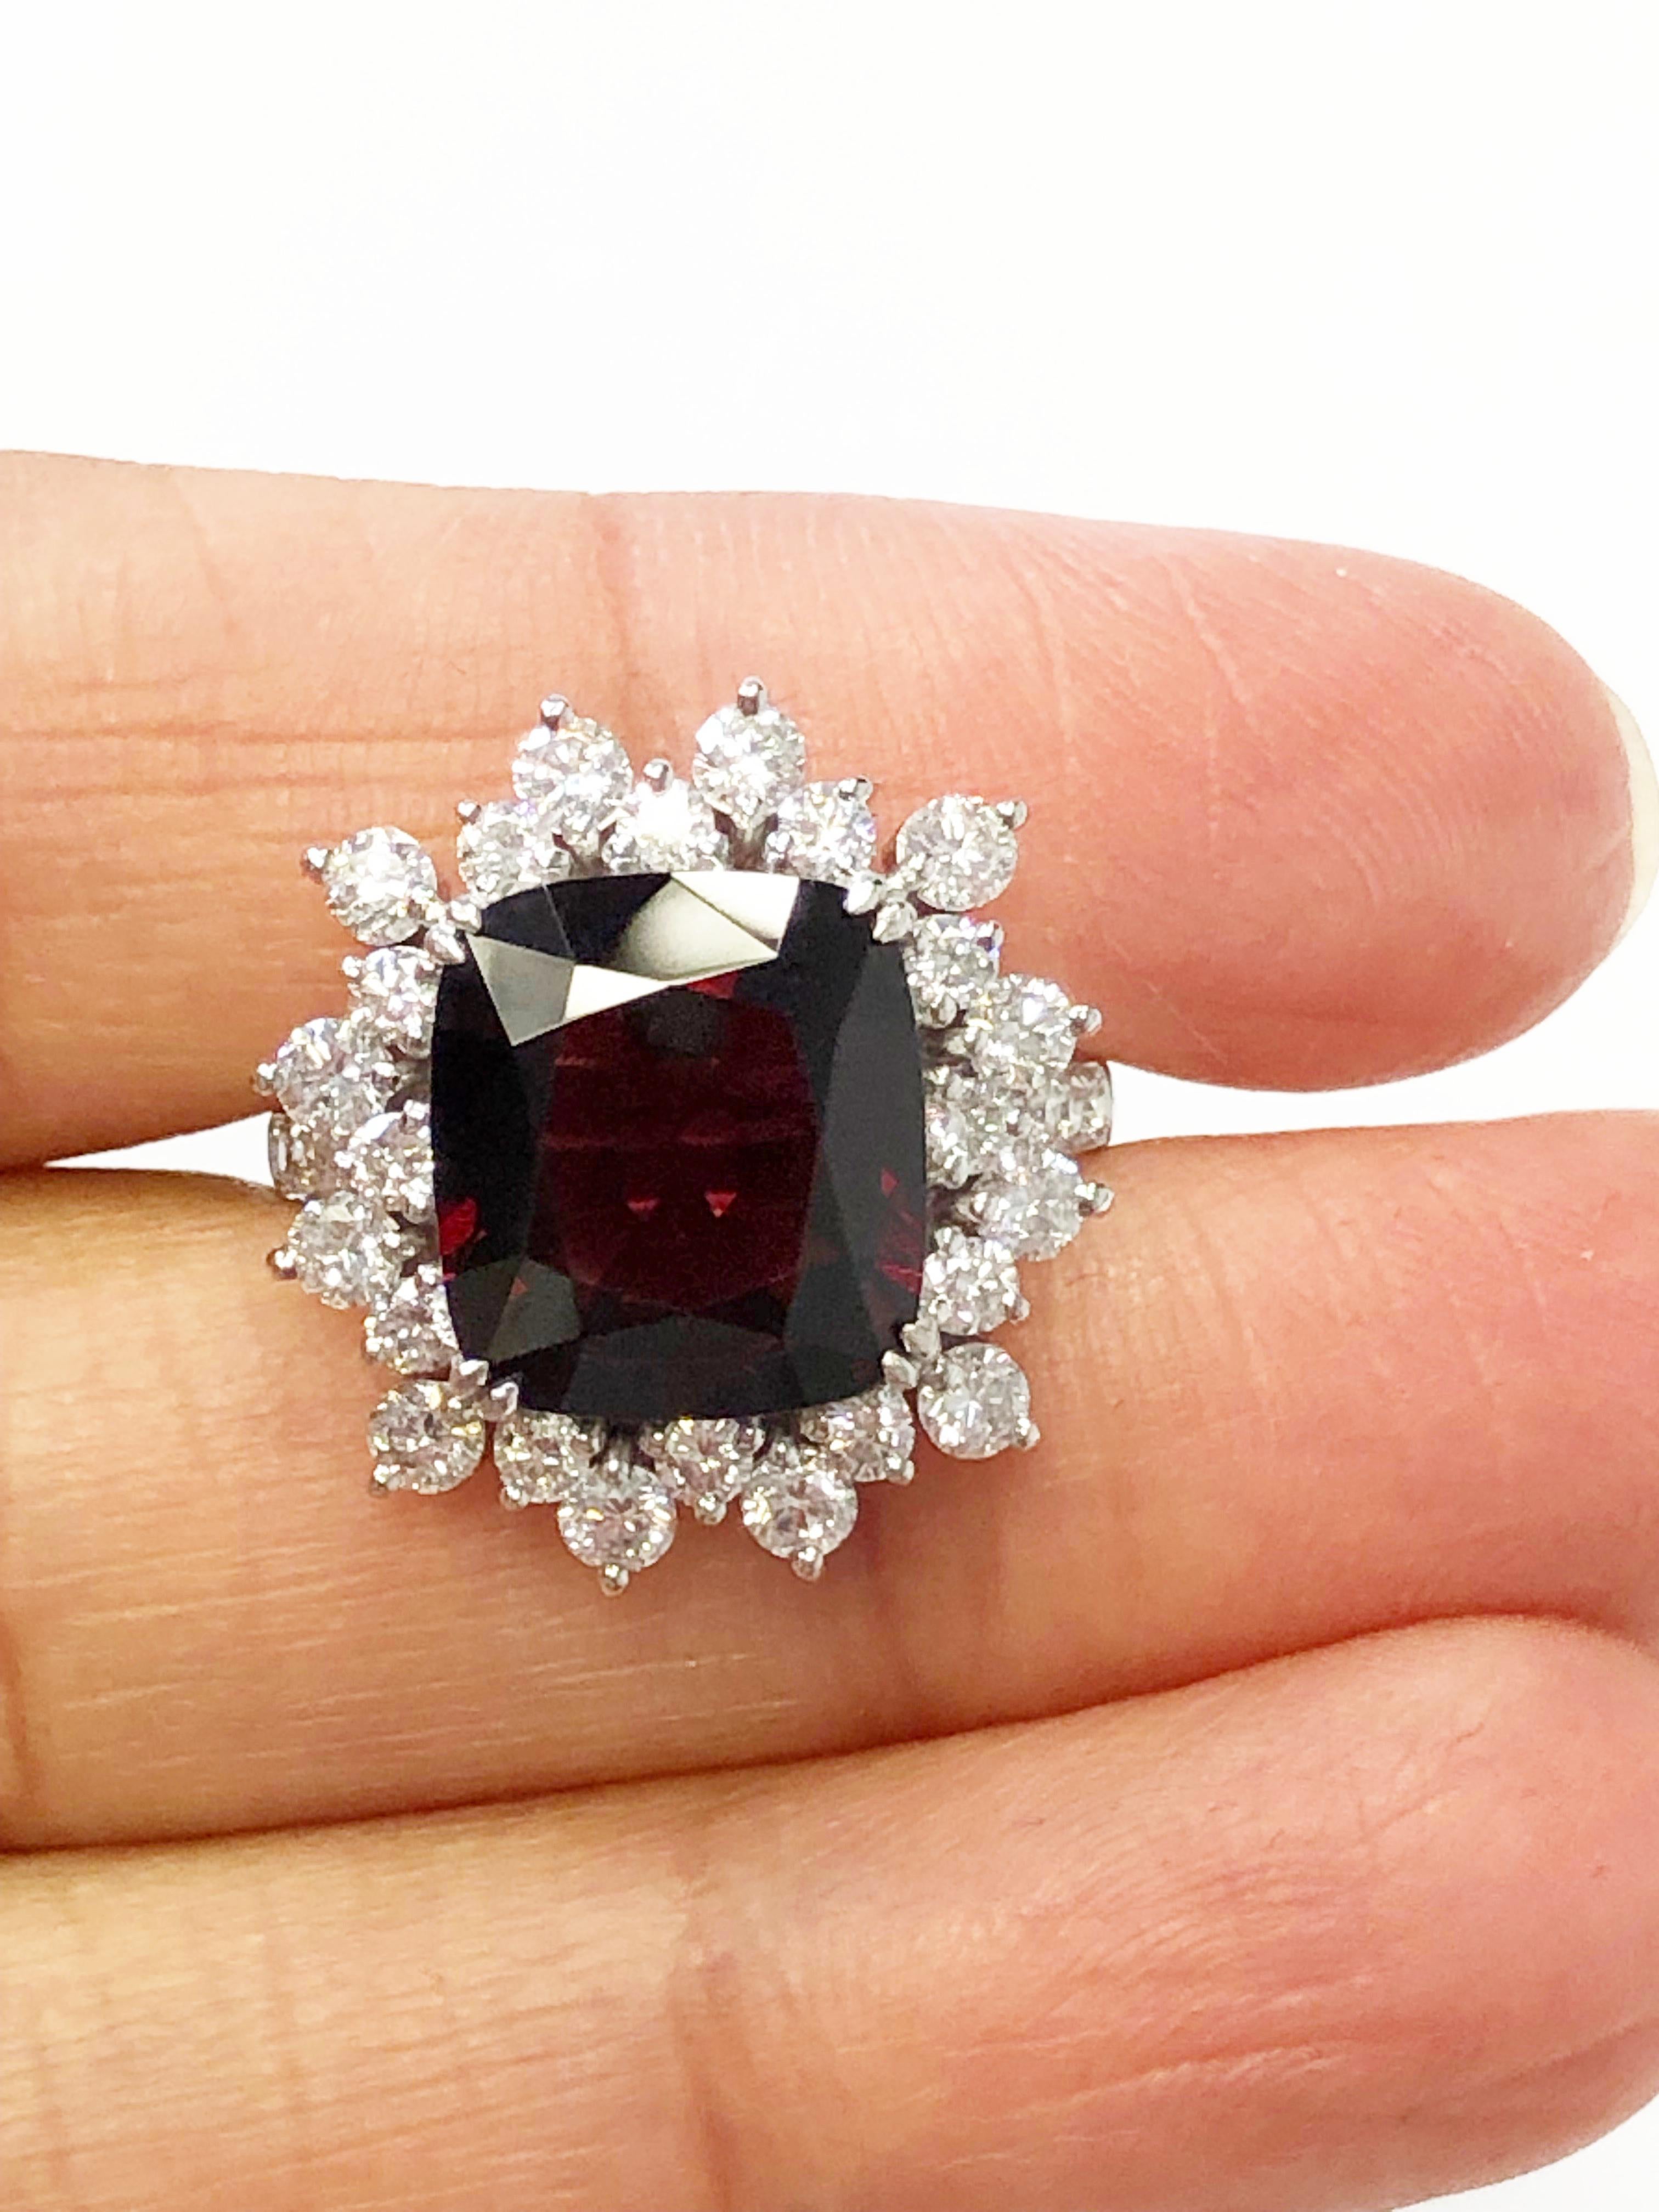 Captivating deep red no heat Burma red spinel cushion weighing 6.54 carats with 1.45 carats of bright white diamond rounds.  Handcrafted dainty platinum mounting in size 6.  GIA cert for red spinel available.


